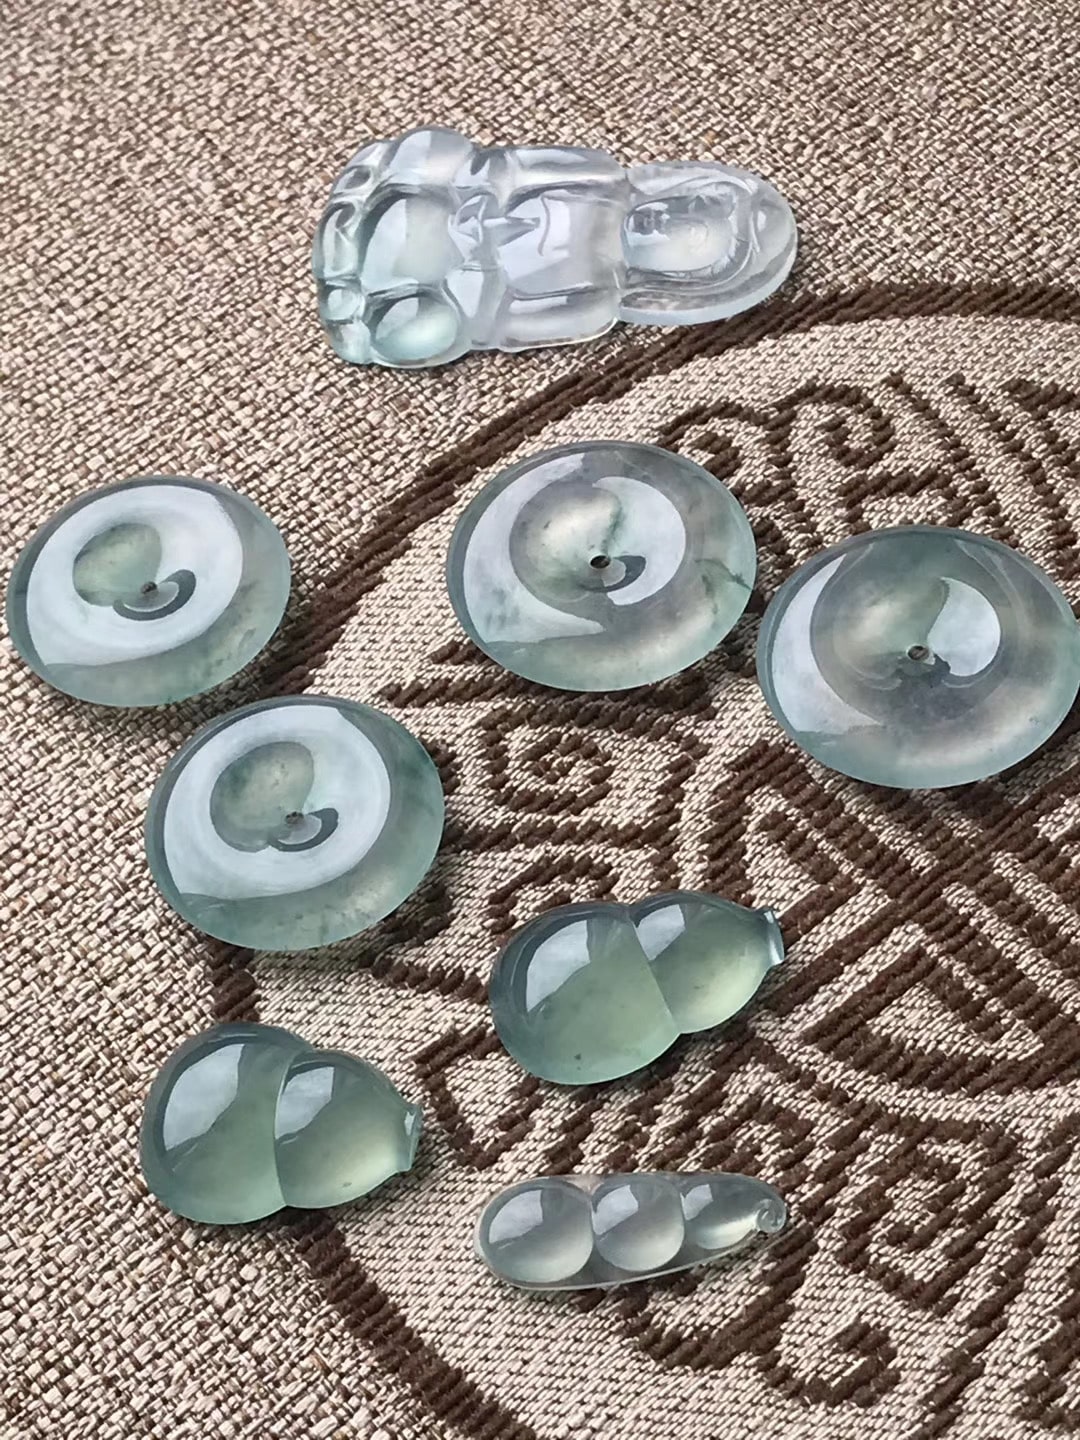 Authentic jade purchase guide, Helen Grade A Jade